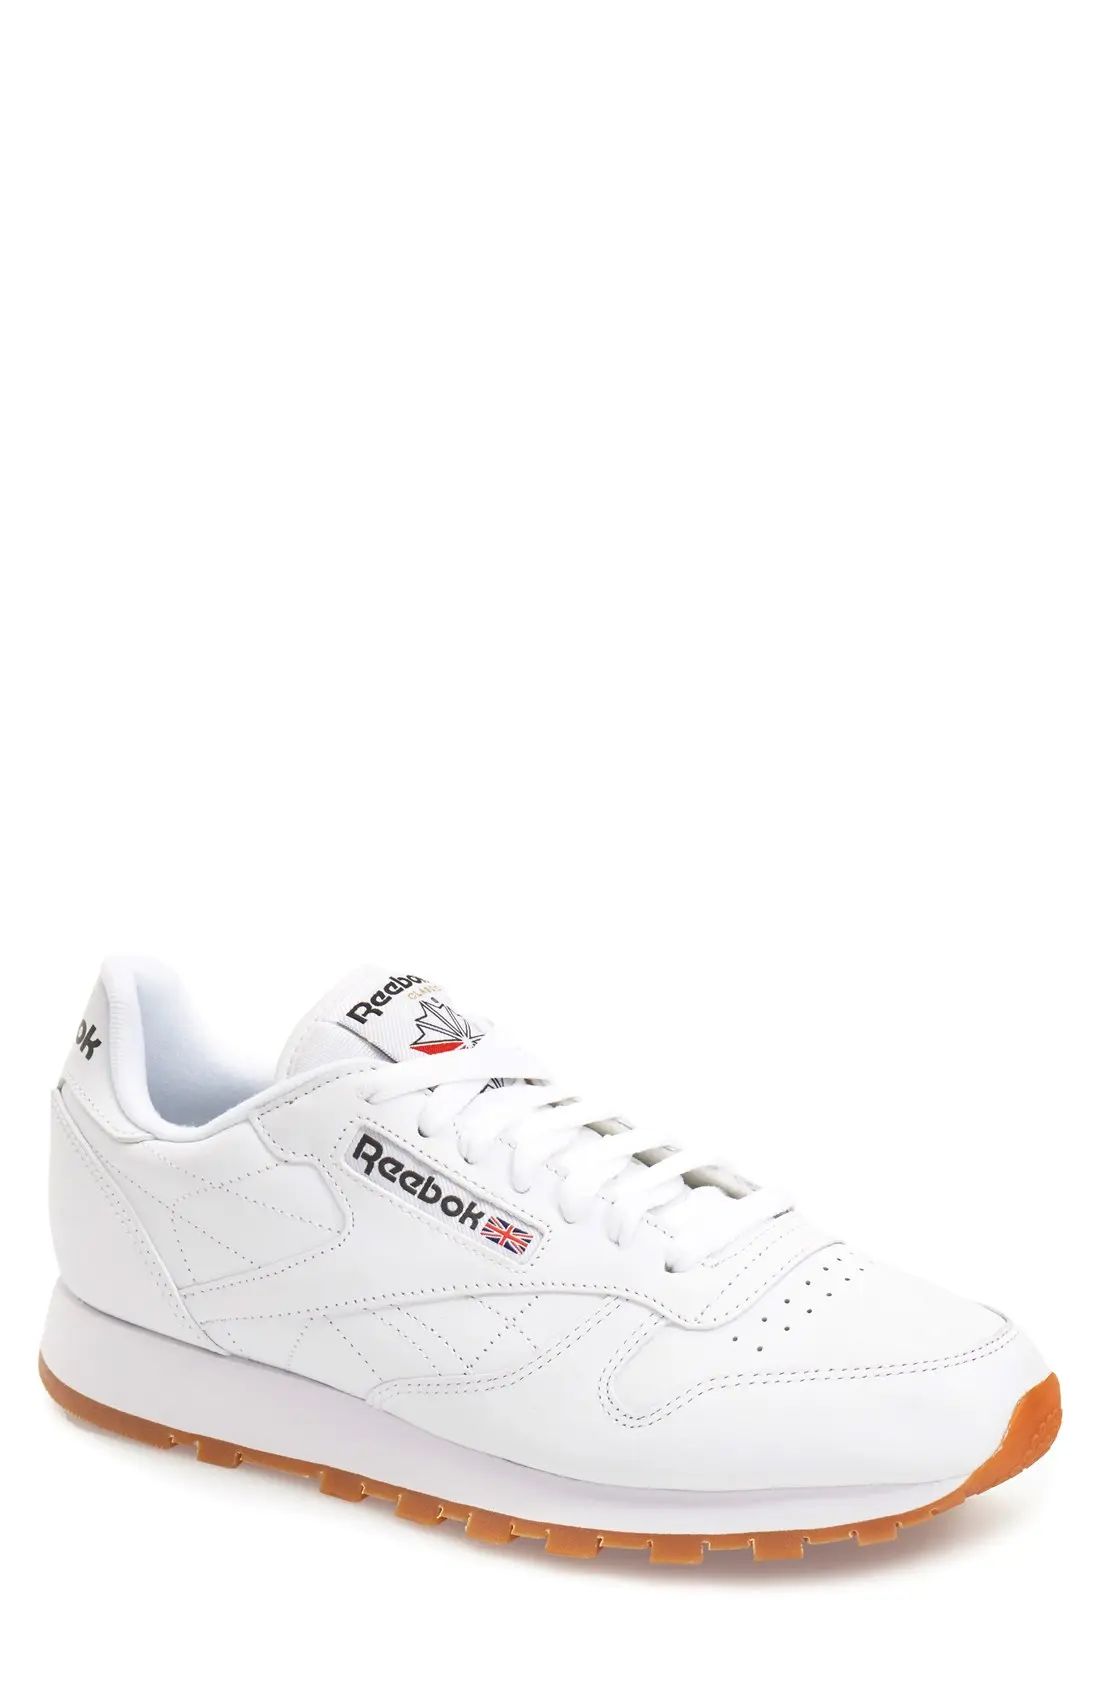 Classic Leather Sneaker | Nordstrom